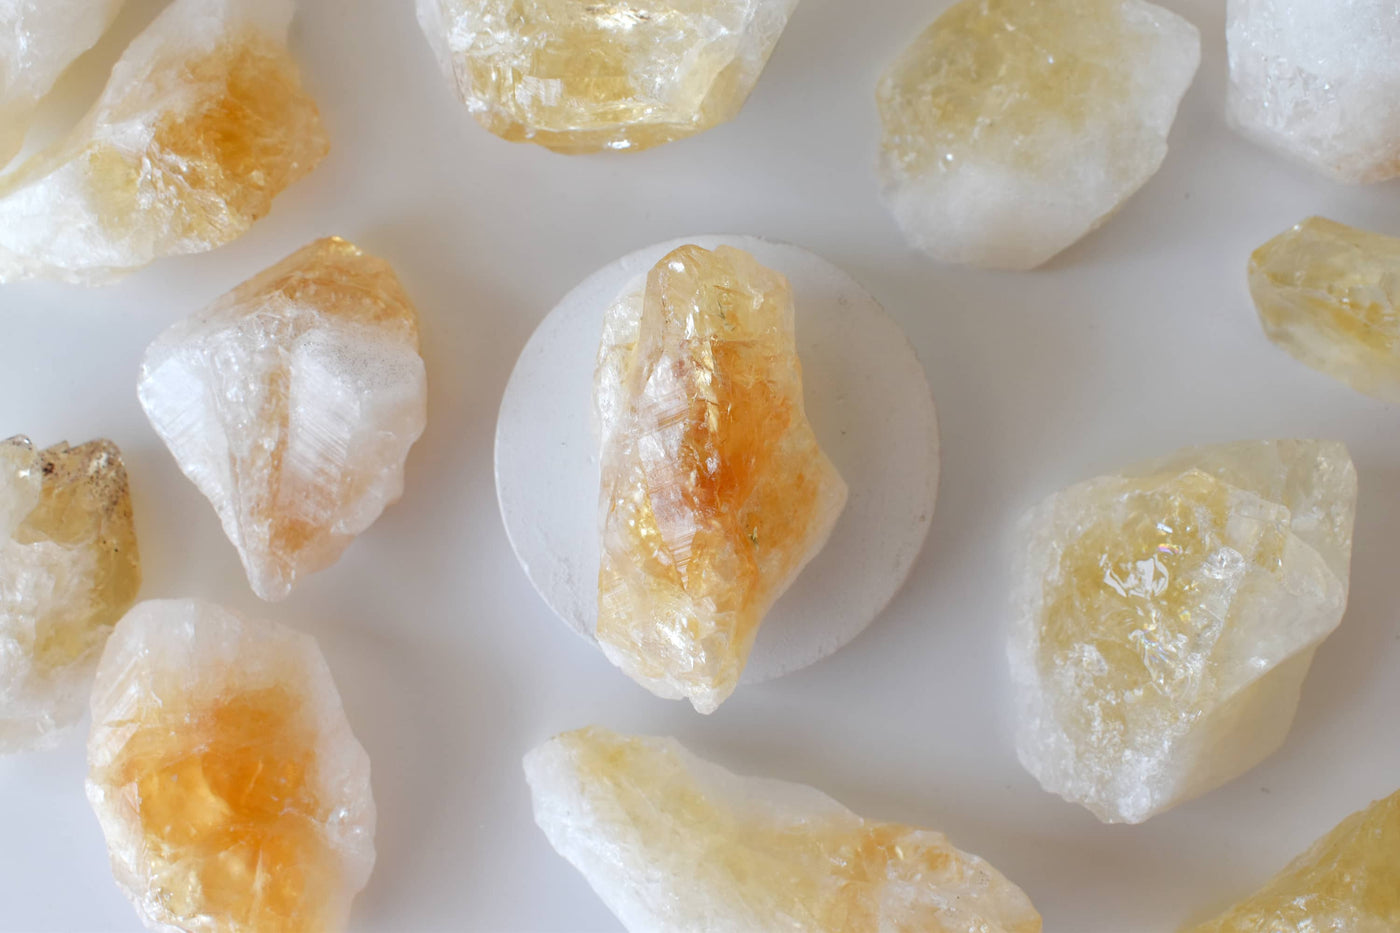 Natural Citrine Points, Natural Bulk Crystals (Stress Relief and Good Fortune)